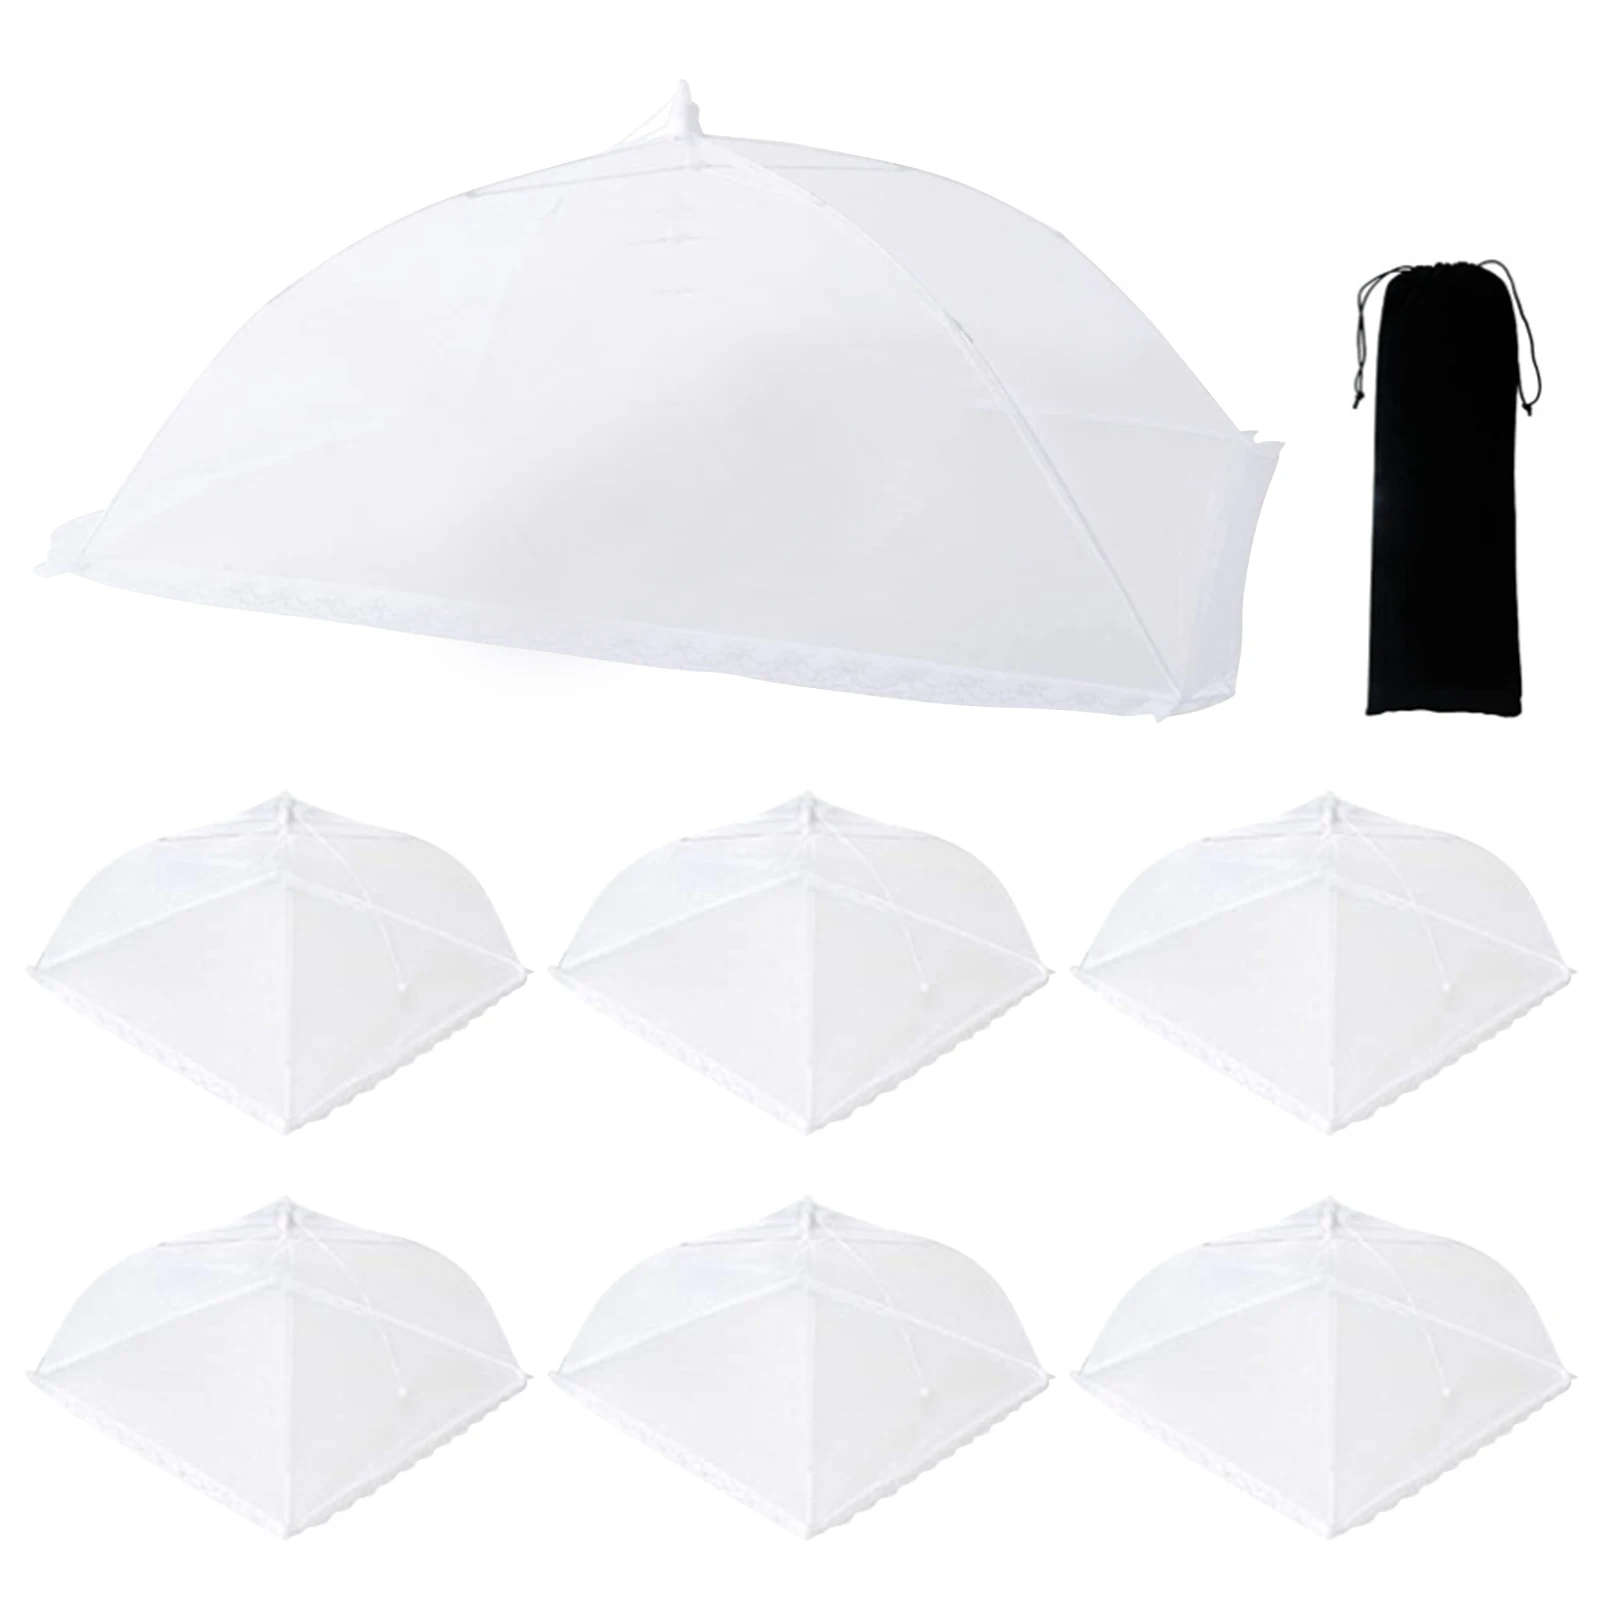 

7pcs For Outside Dome BBQs Mesh Fabric Durable Washable Collapsible Reusable Sturdy Screen Net Tent Umbrella Parties Food Covers